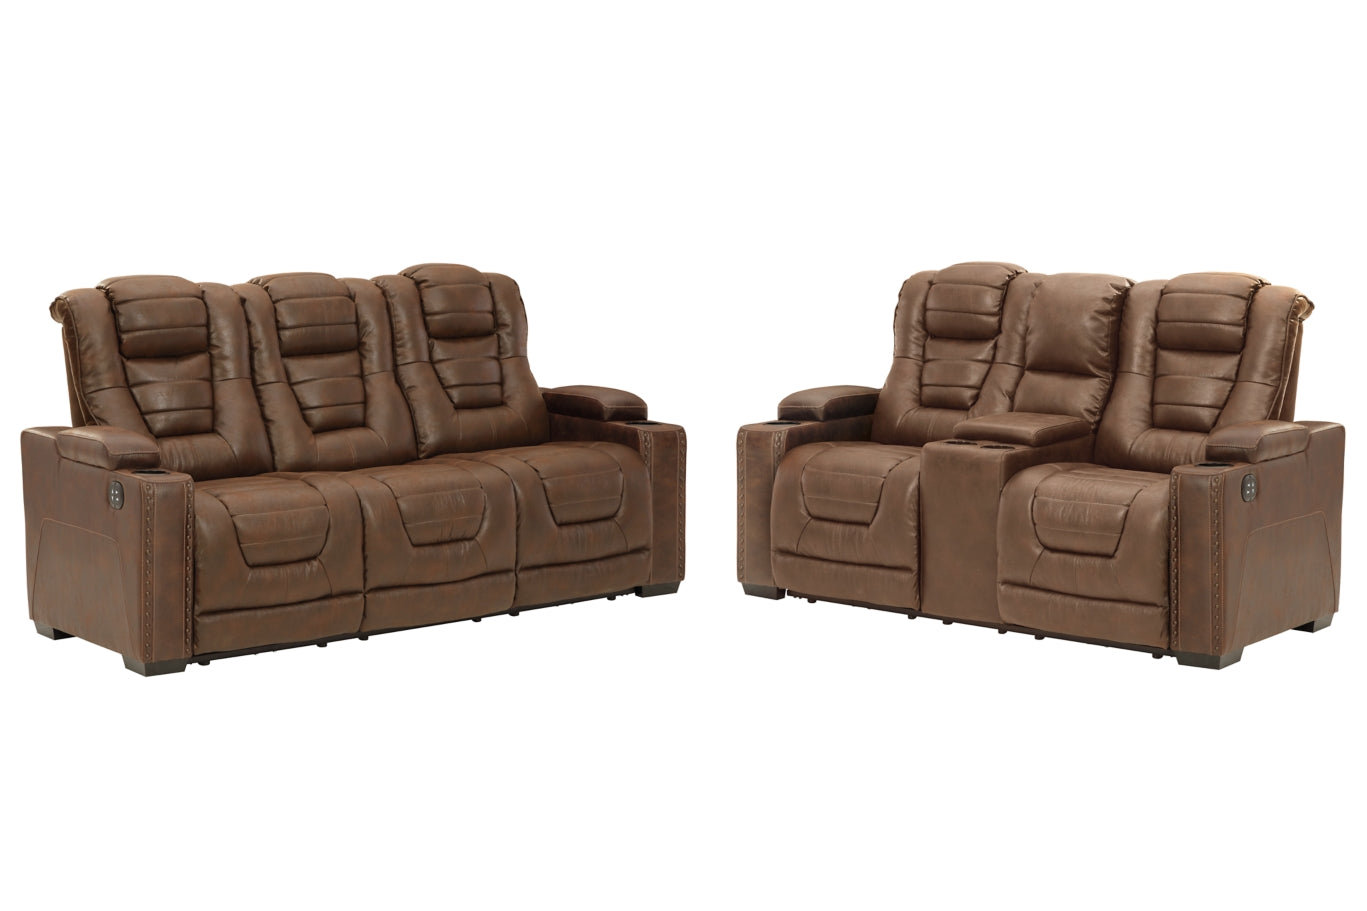 Owner's Box Sofa and Loveseat - furniture place usa